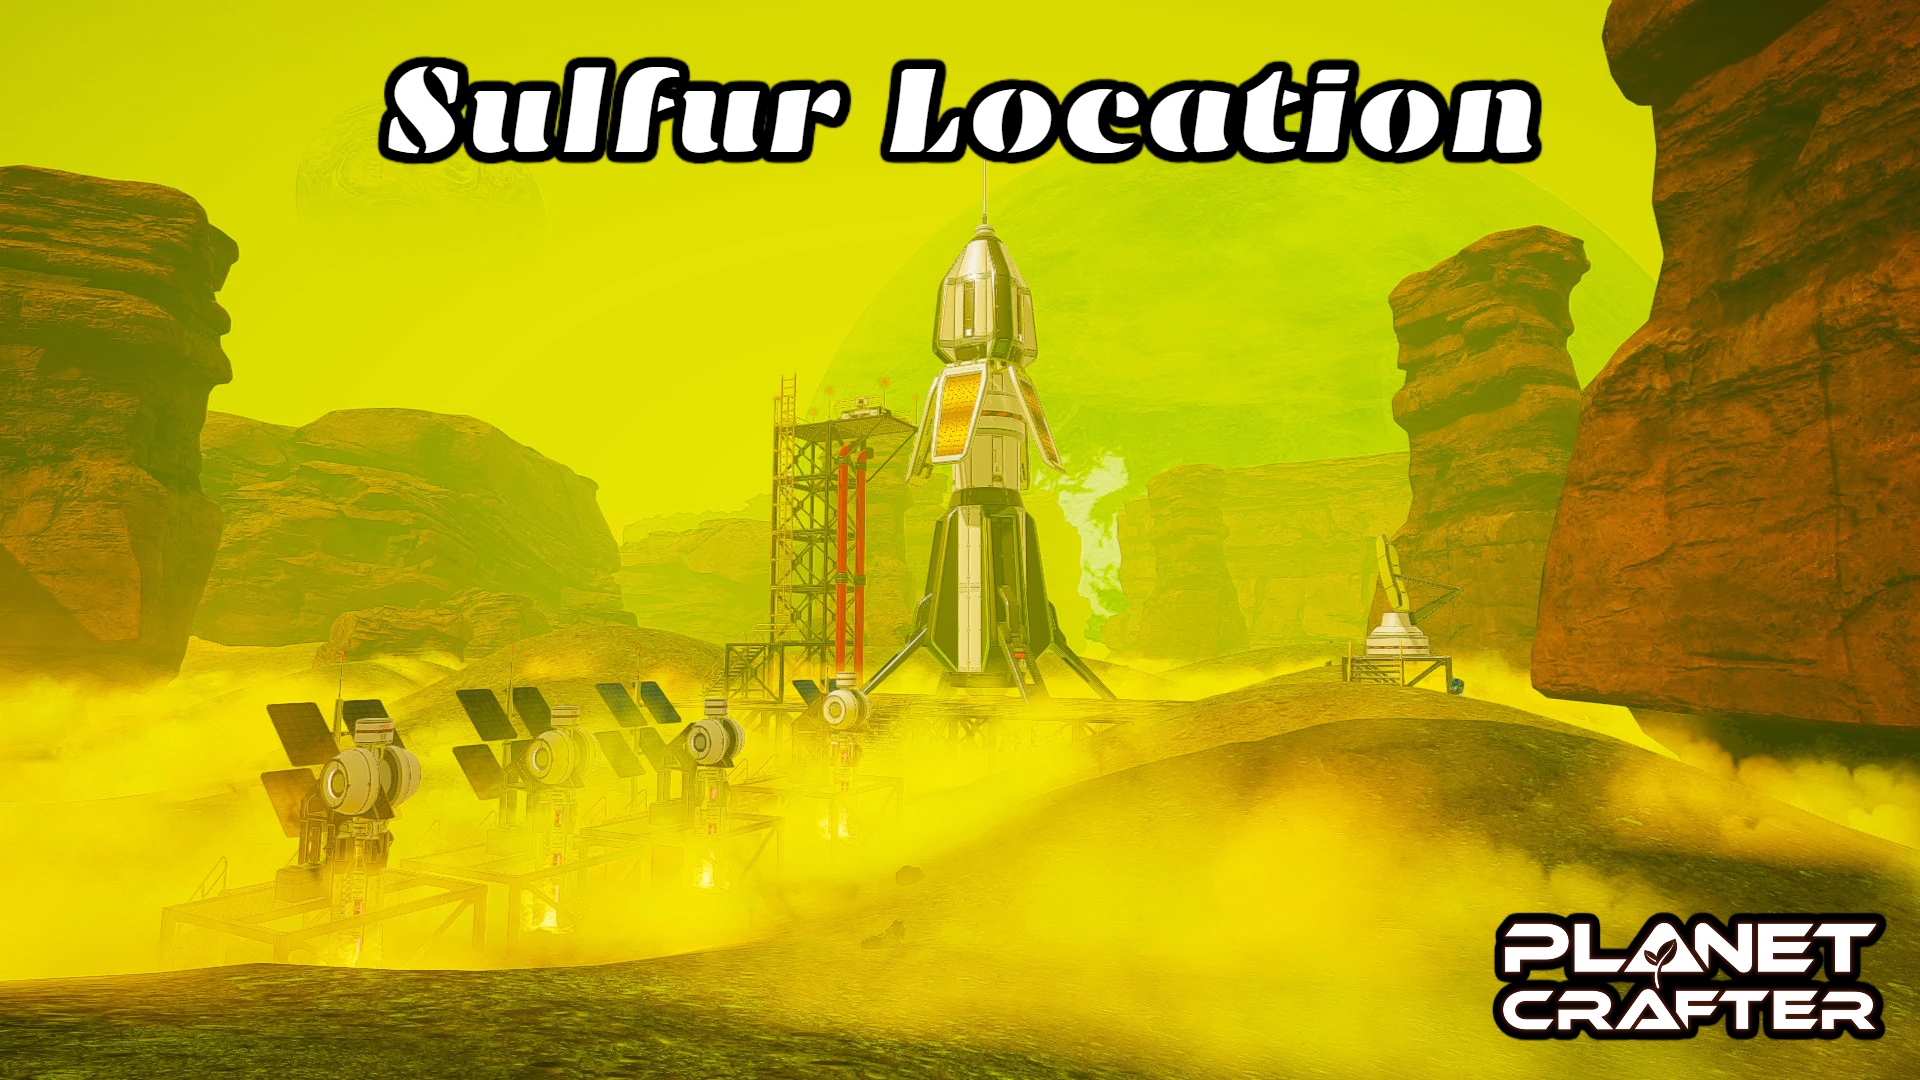 You are currently viewing The Planet Crafter Sulfur Location